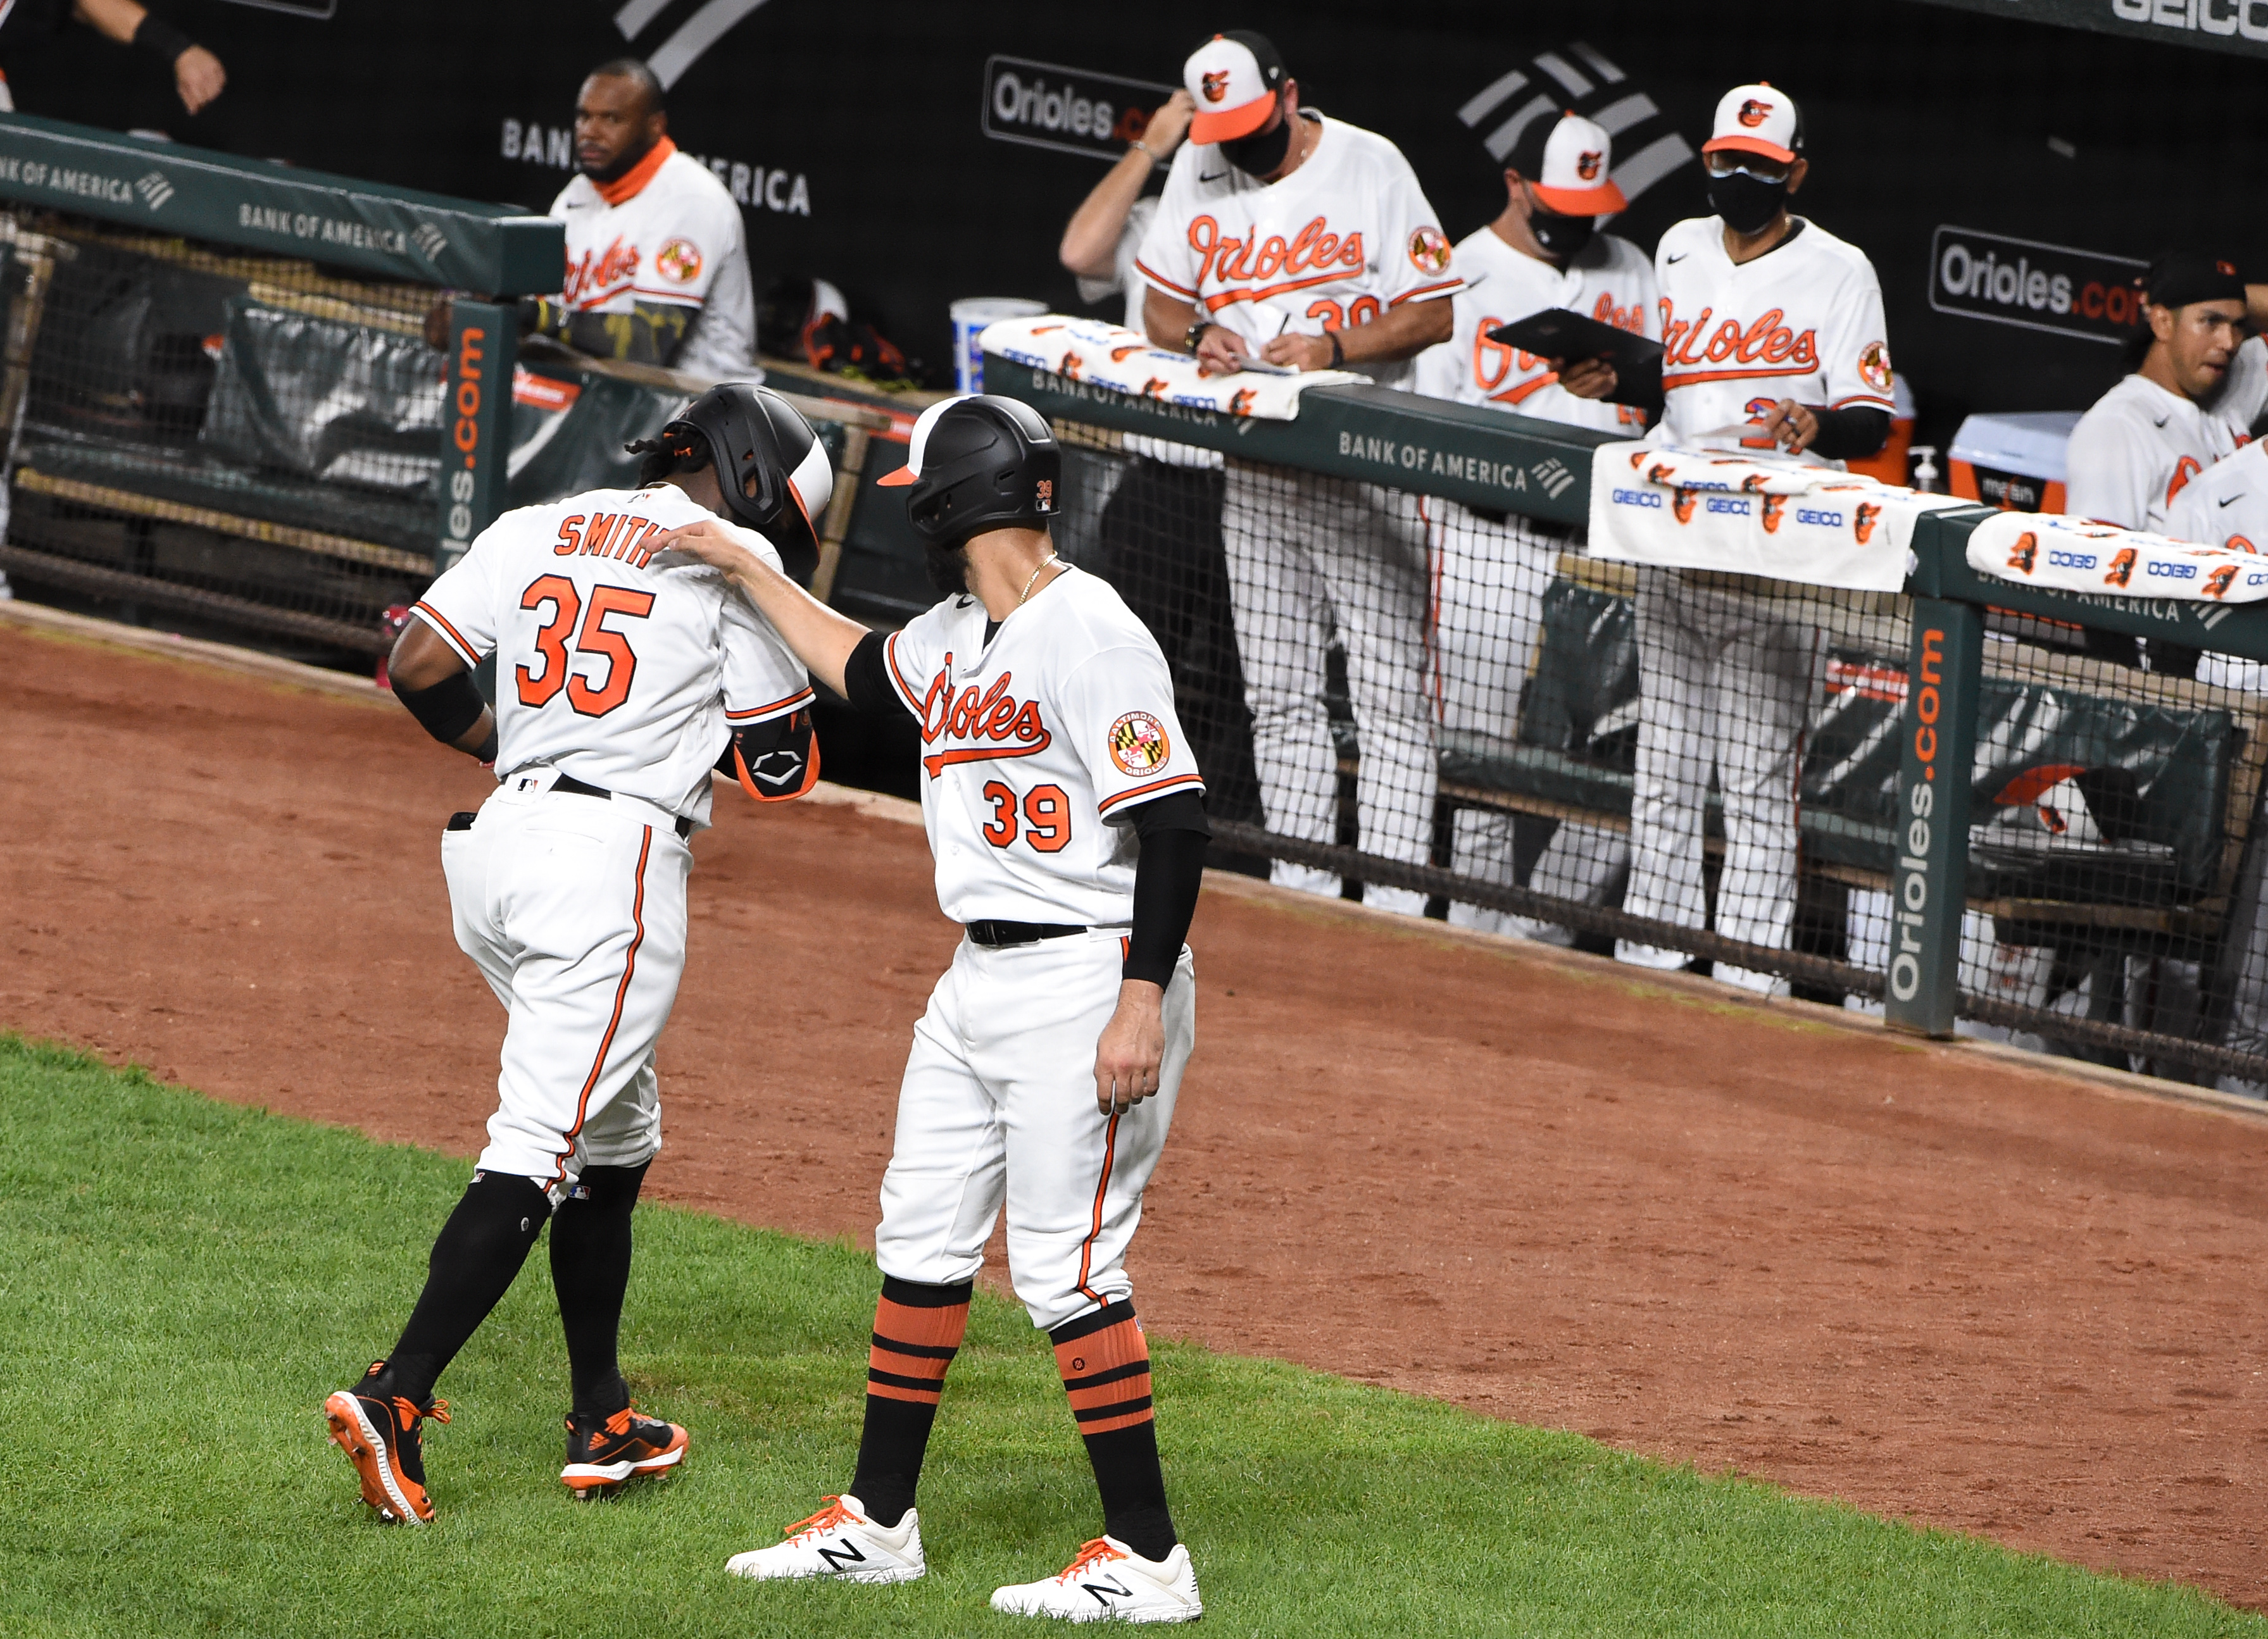 Hobbled by injury, Orioles shortstop Jose Iglesias excelled offensively in  2020 - Camden Chat